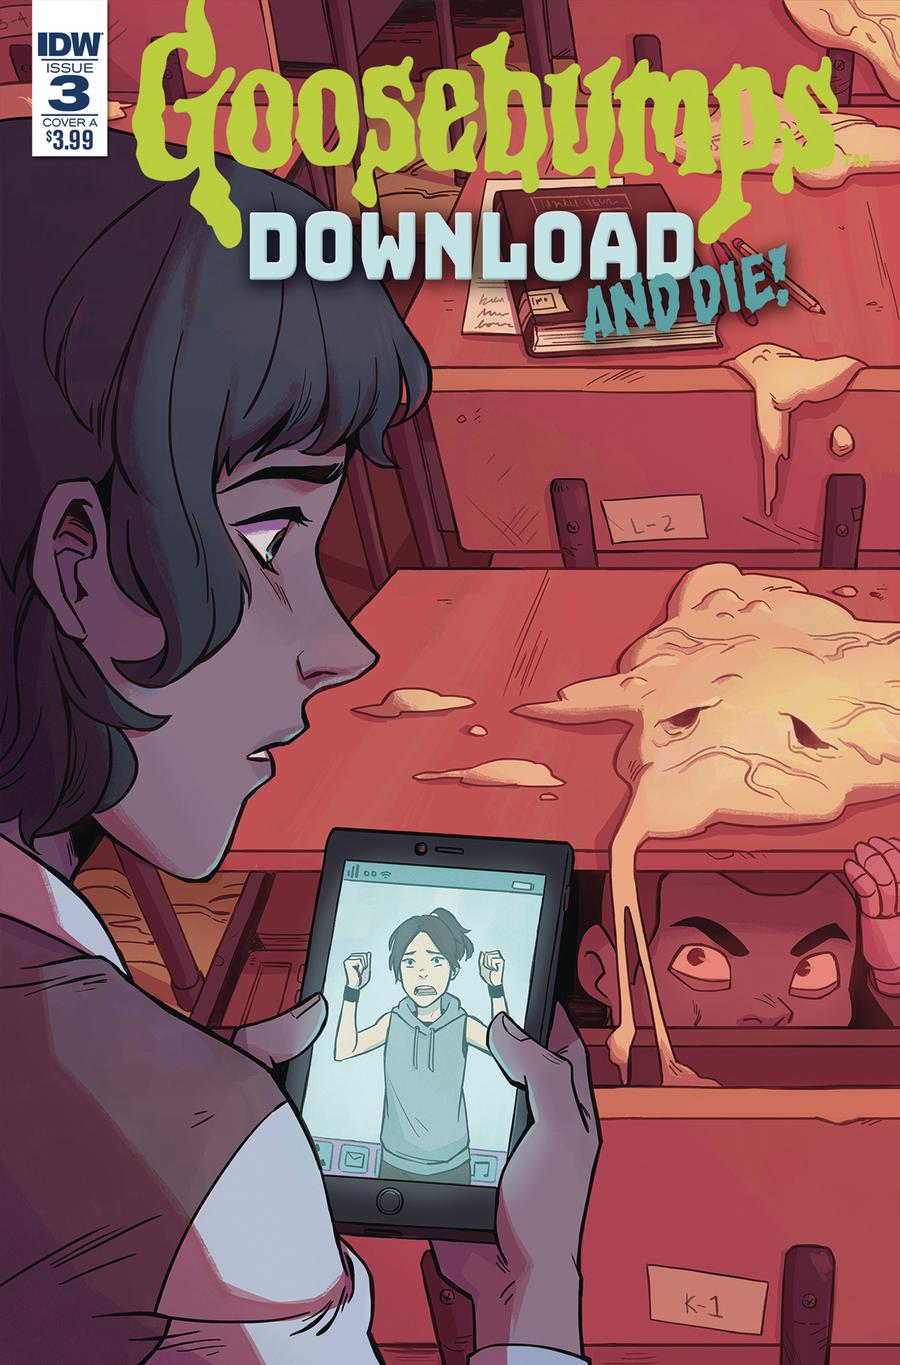 Goosebumps Download And Die #3 Cover A Regular Michelle Wong Cover